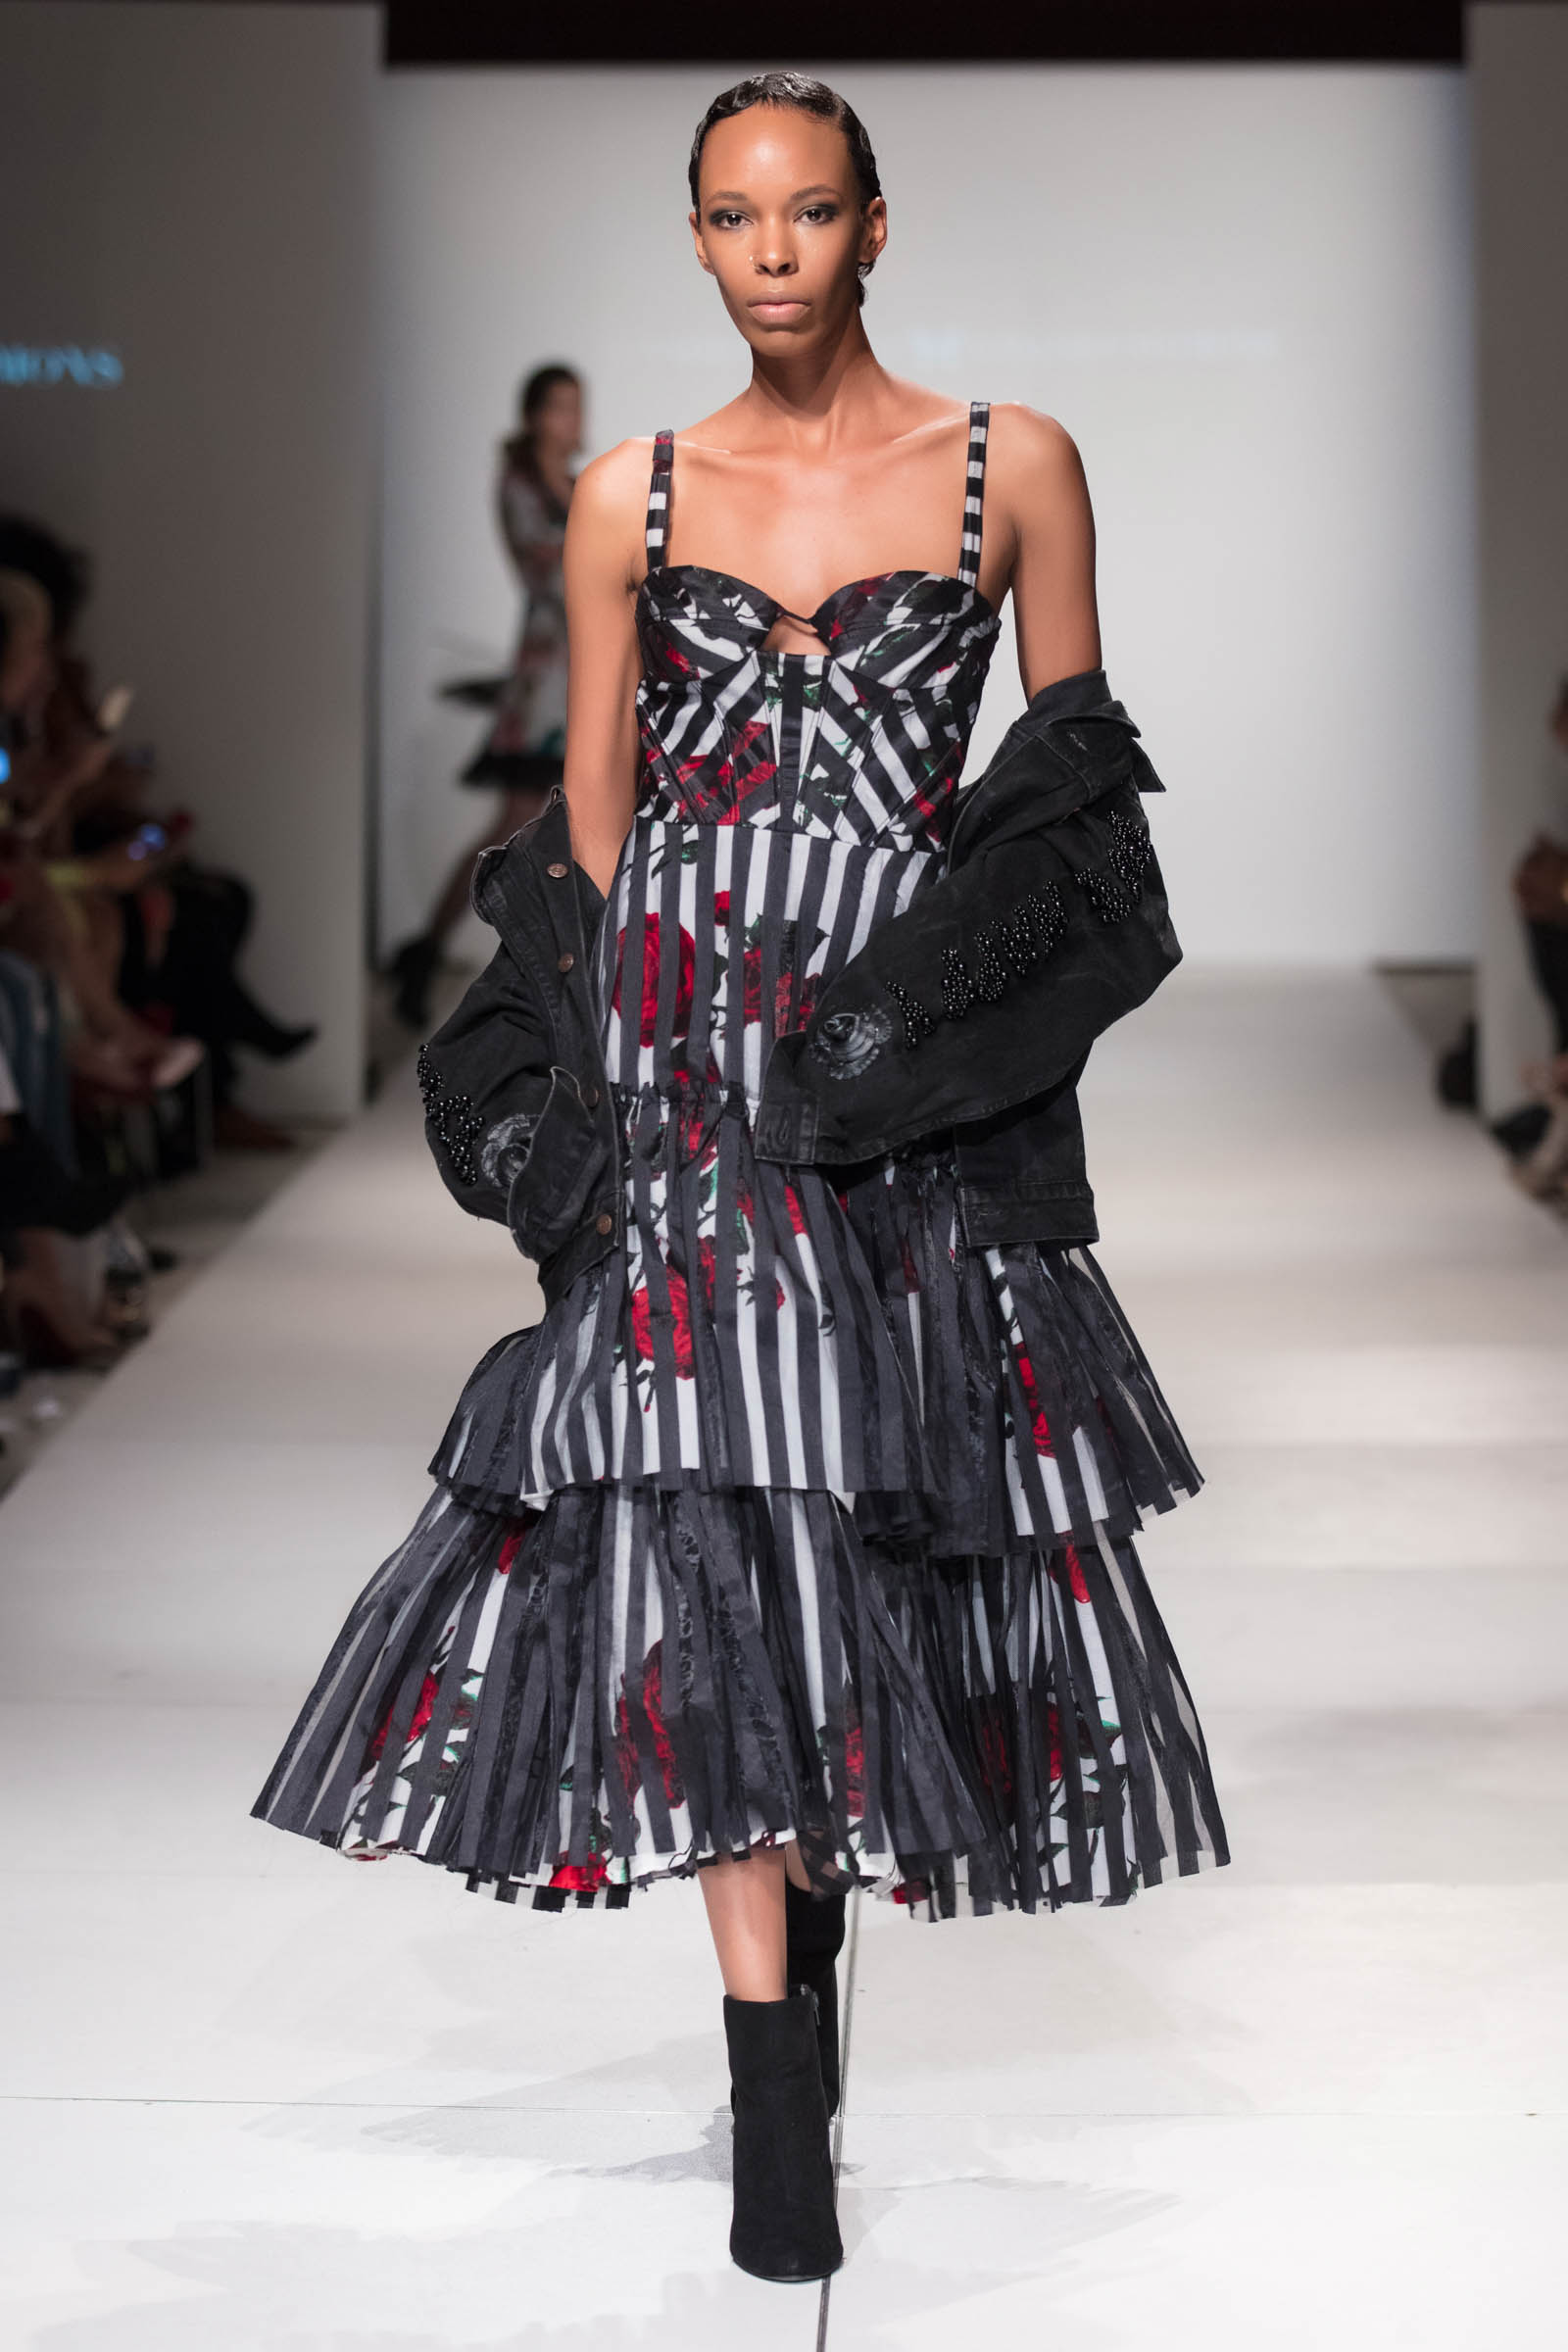 LAFW Gala: Behind the BADBUTERFLY Collab with Project Runway Star ...